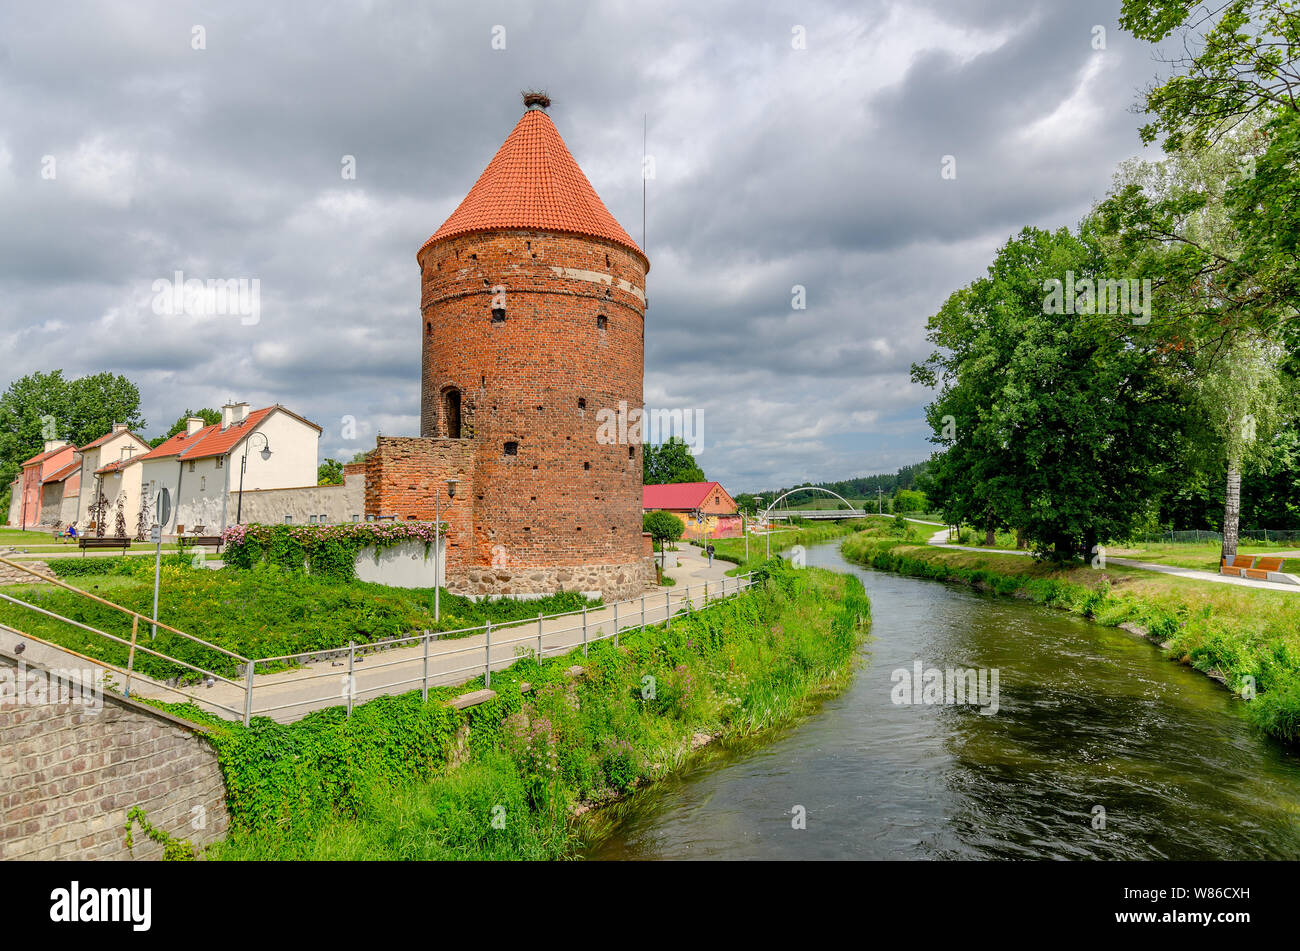 Dobre Miasto, ger. Guttstadt, warmian-mazurian province, Poland. The Stork Tower, remains of the medieval city walls by the river of Lyna (Alle). Stock Photo